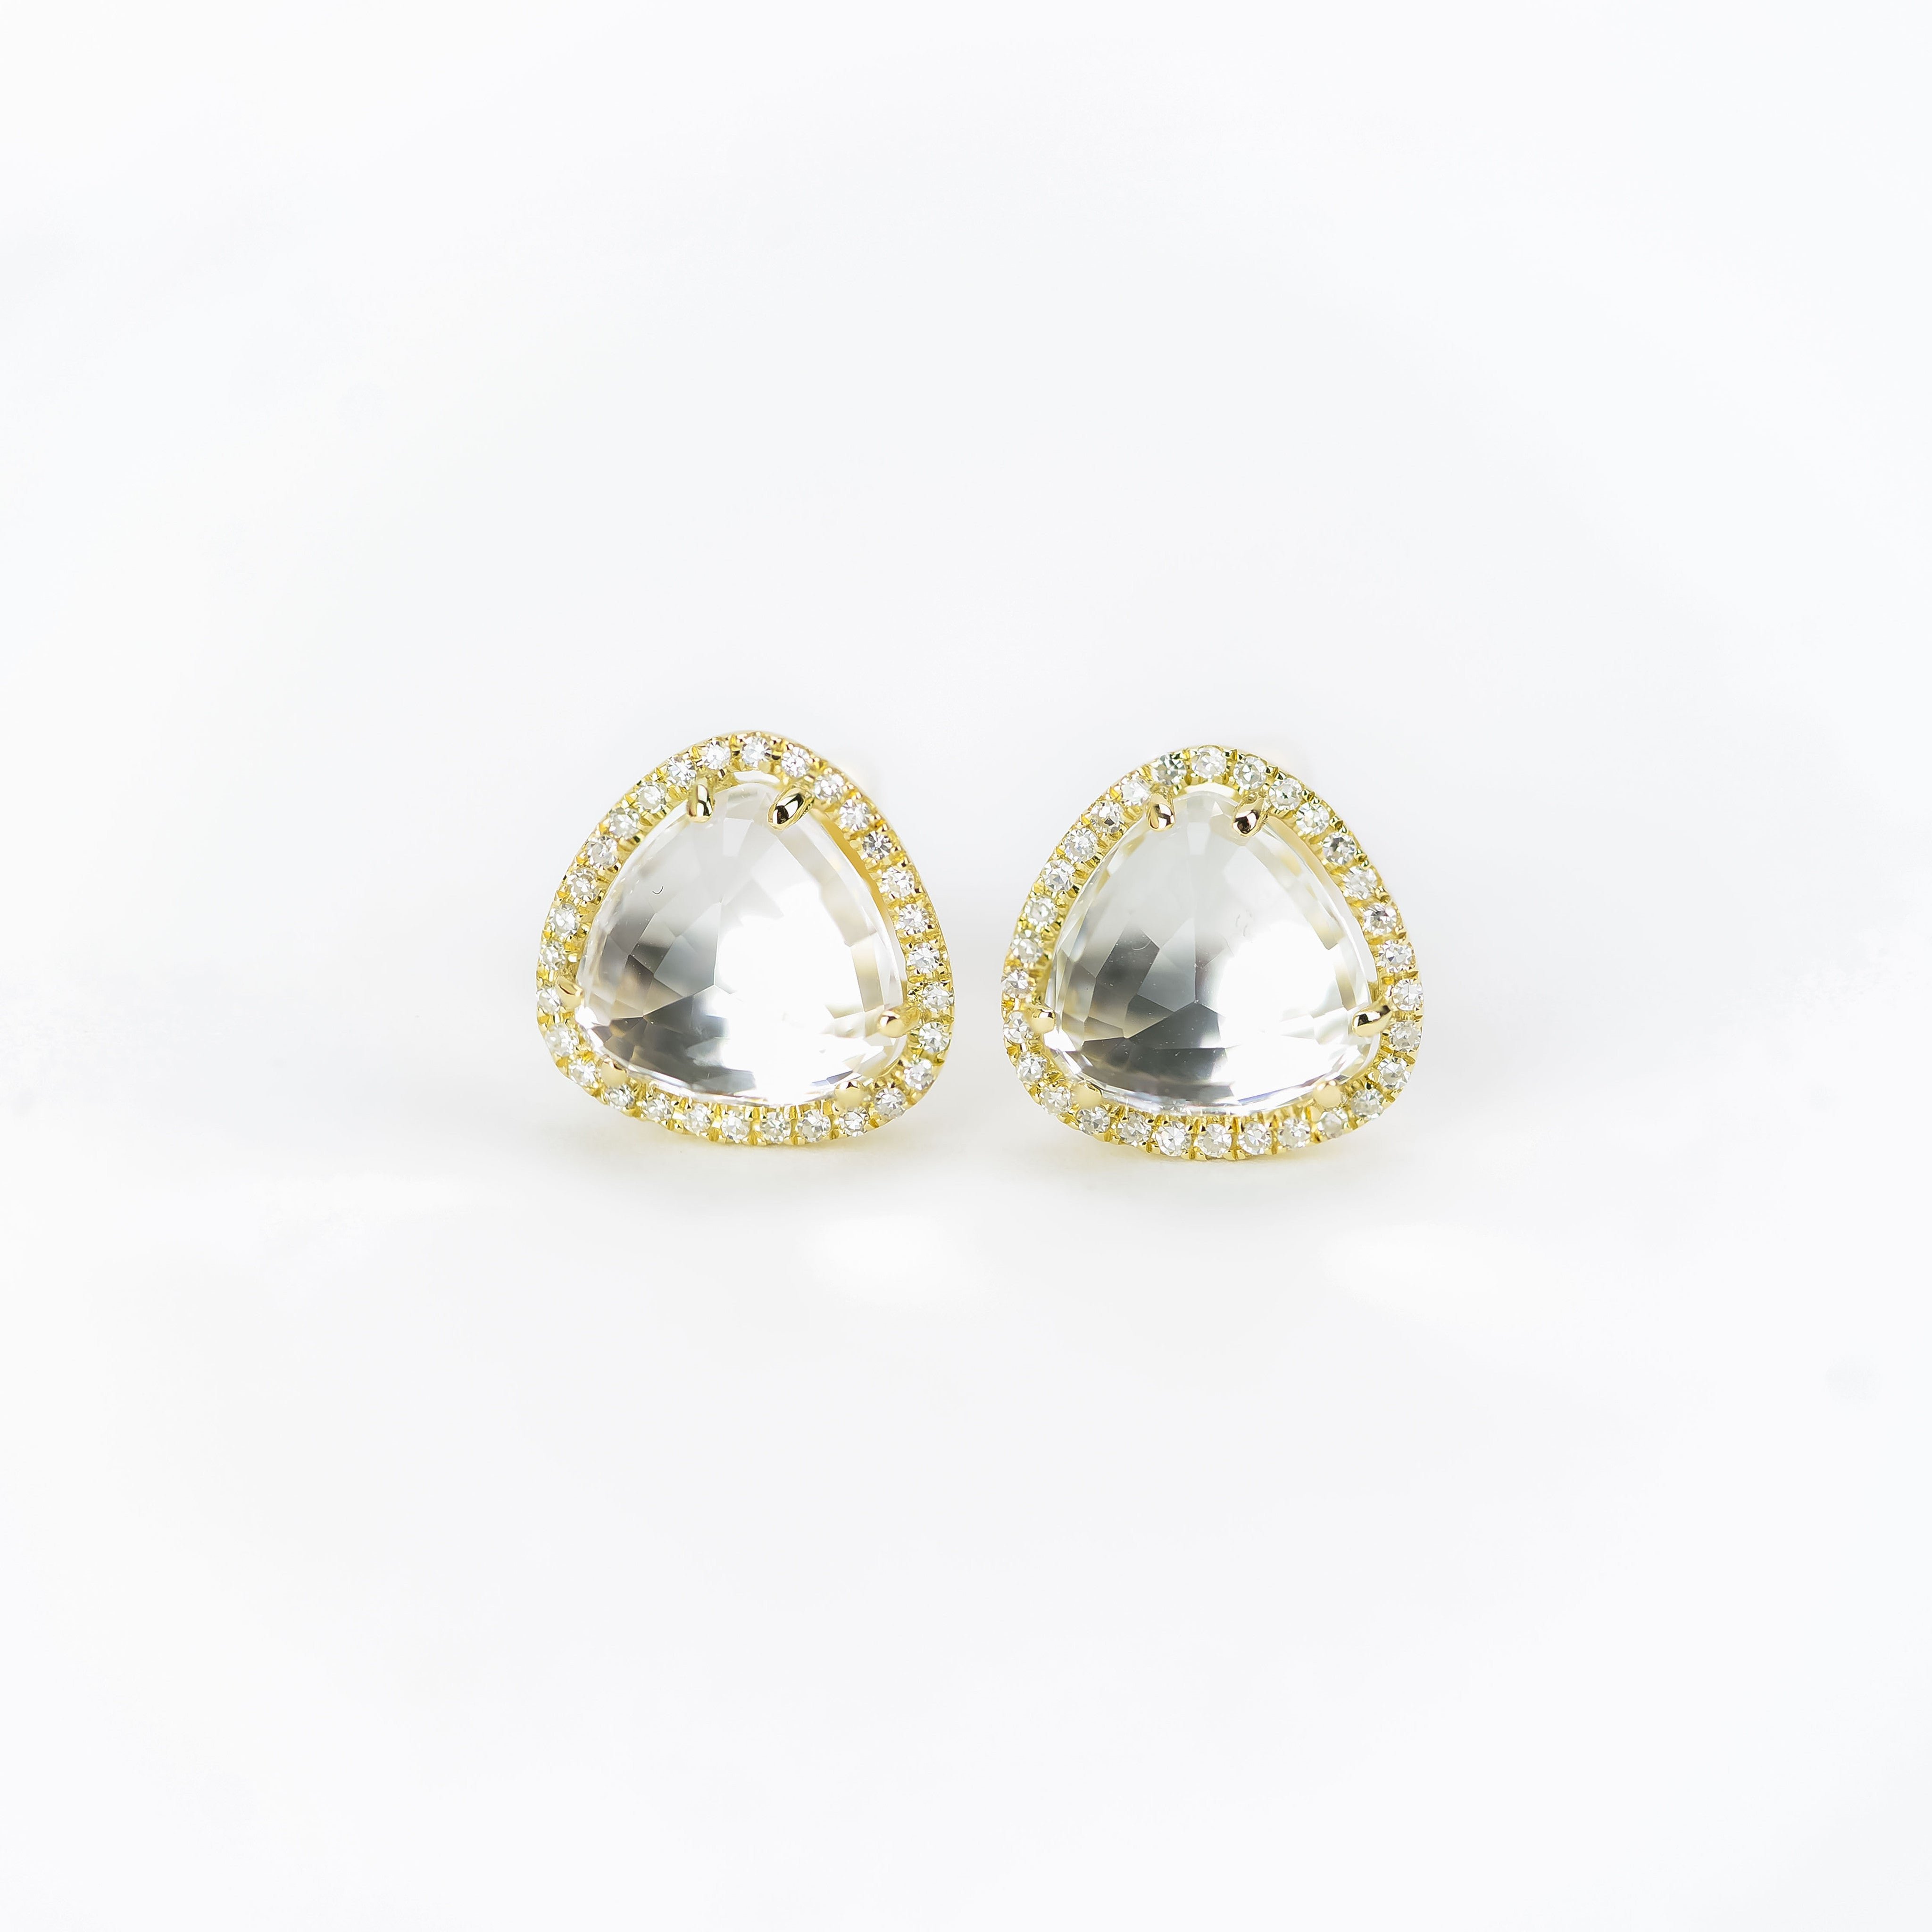 White Topaz and Diamond Earrings by Atheria Jewelry